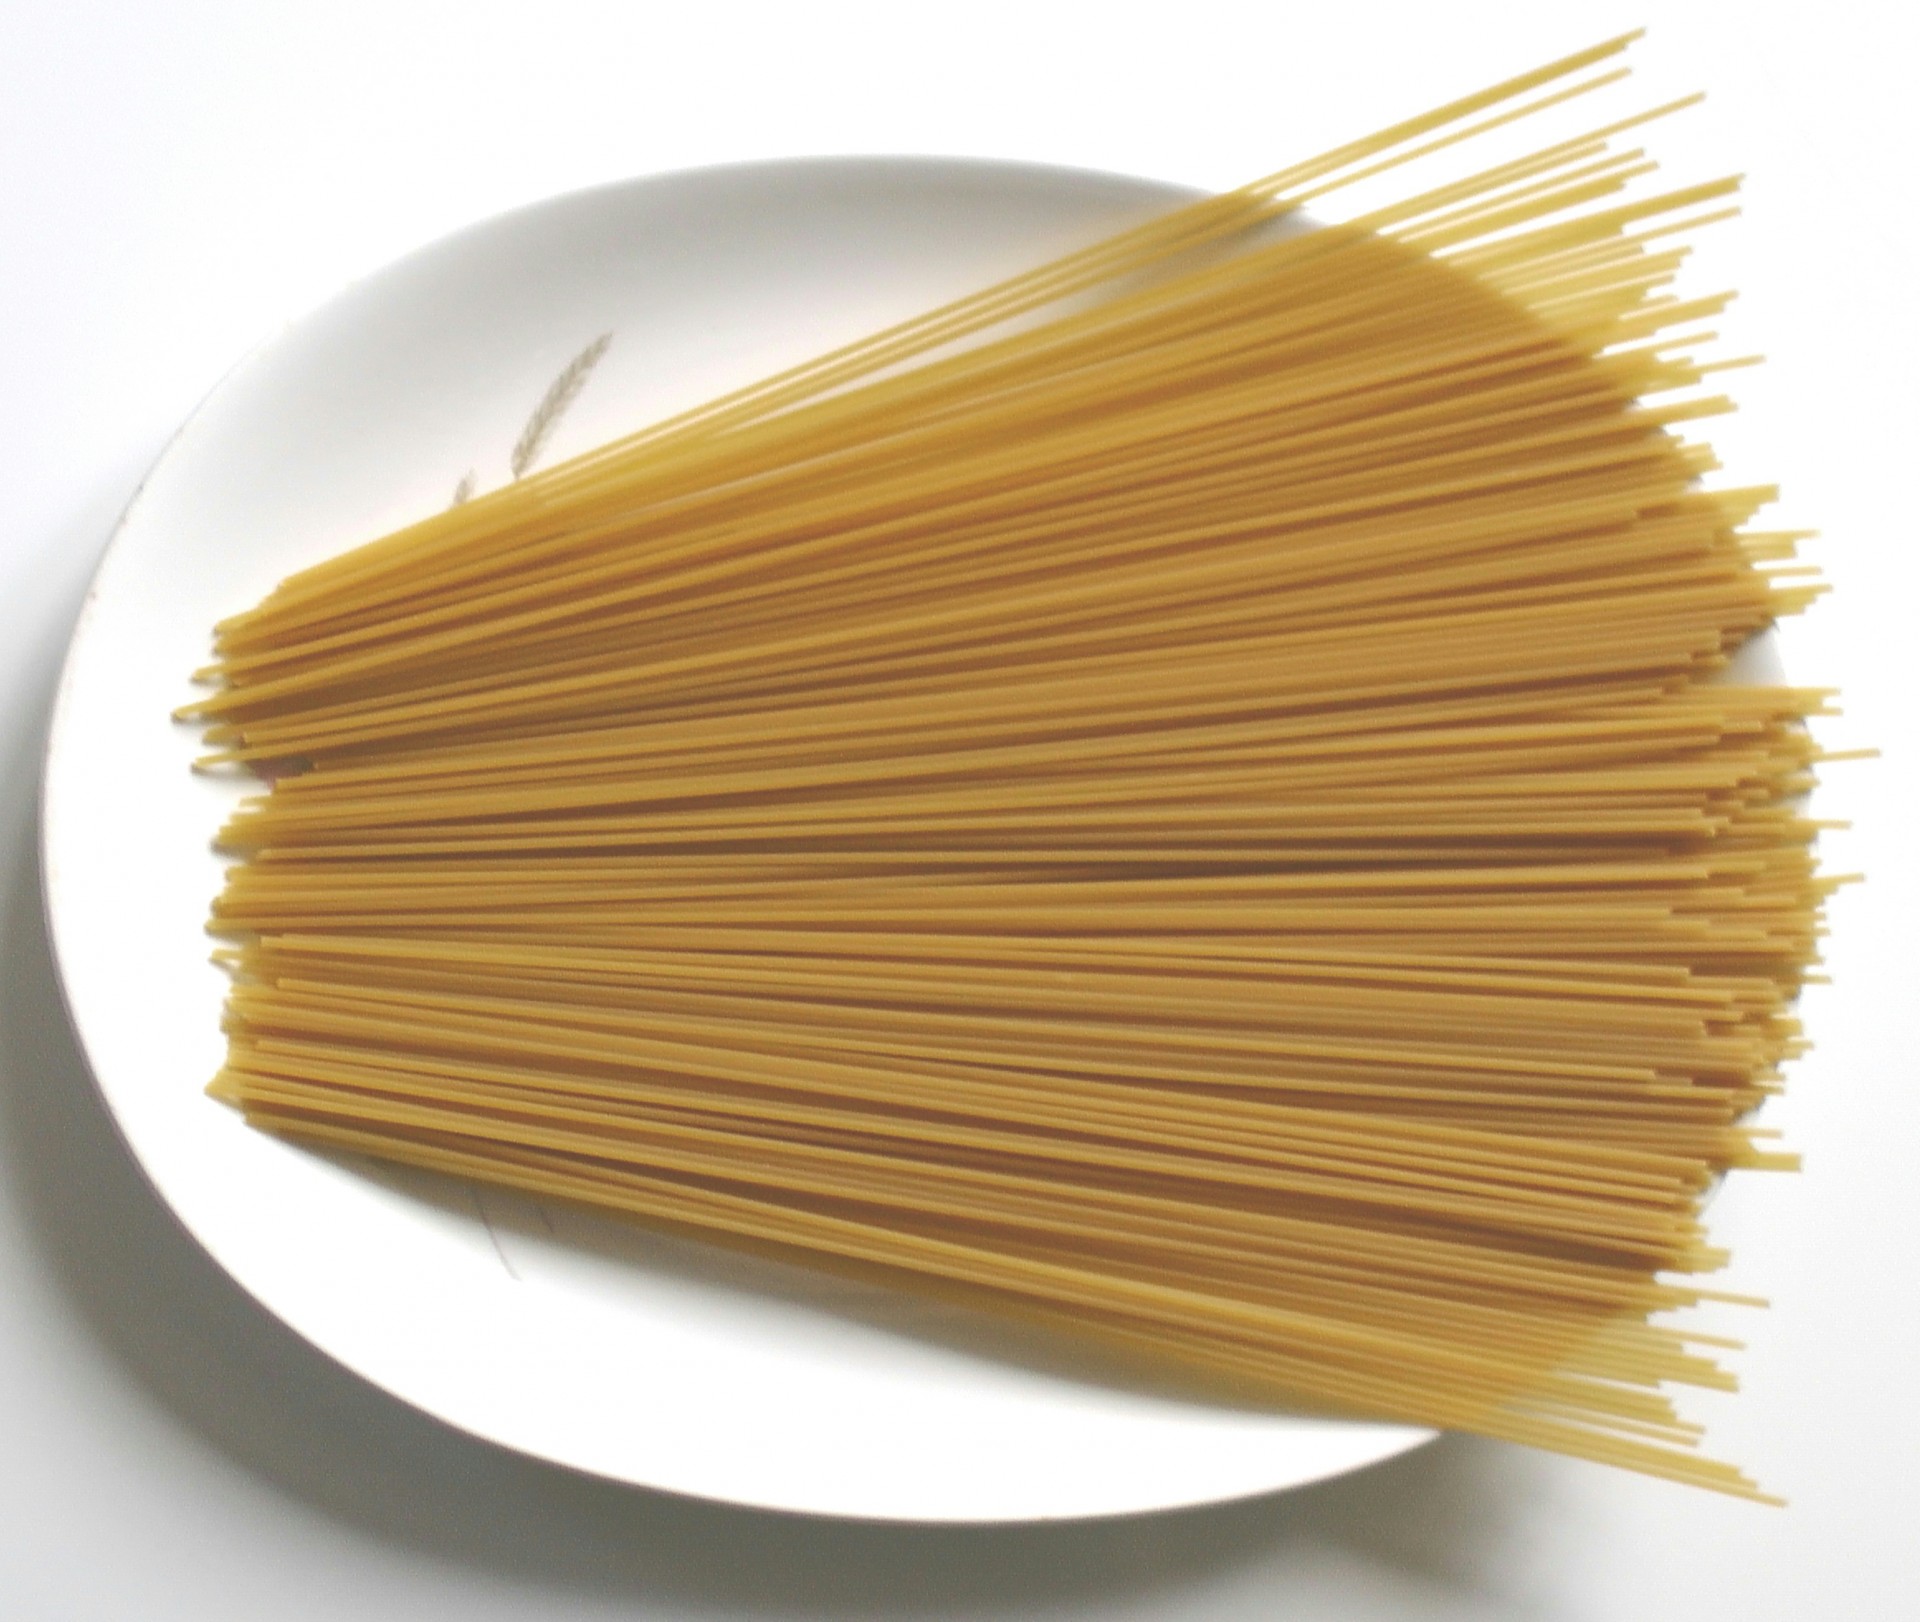 Spaghetti On Plate Free Stock Photo - Public Domain Pictures